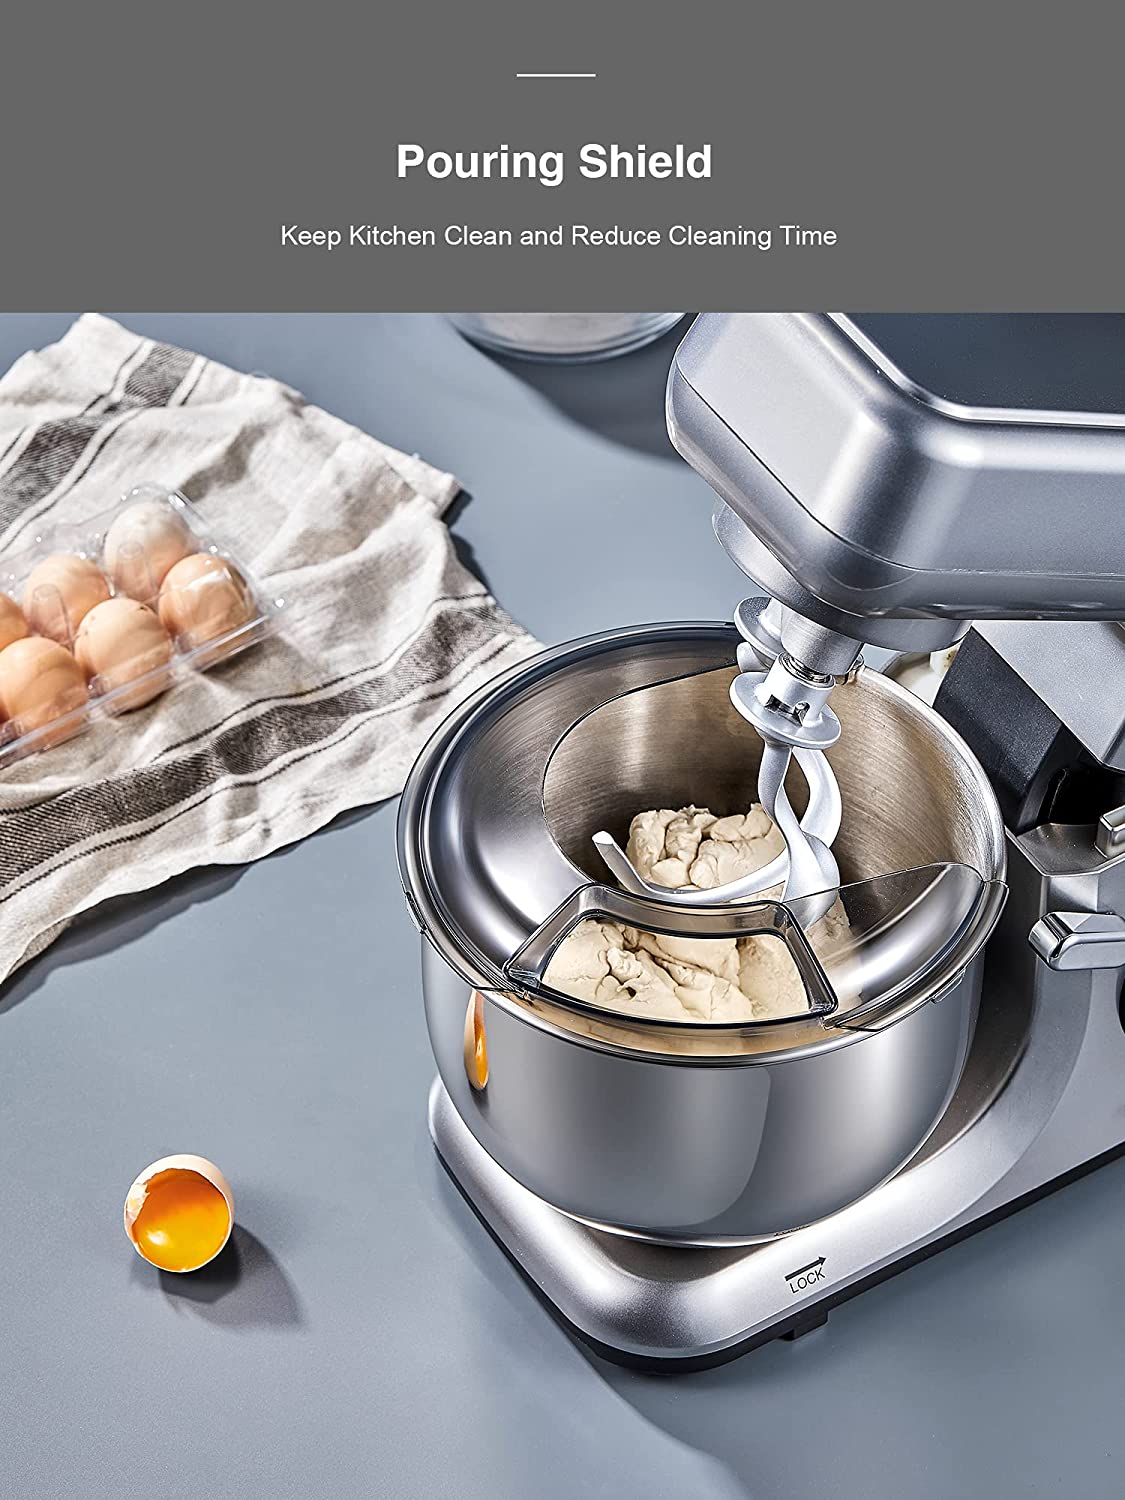 Kealive Mixer Kneader, Pastry Mixer 8 Speed Double Dough Hook with 5.5L Stainless Steel Bowl, 1200W Kneader, Whisk, Rods and Splash Guard